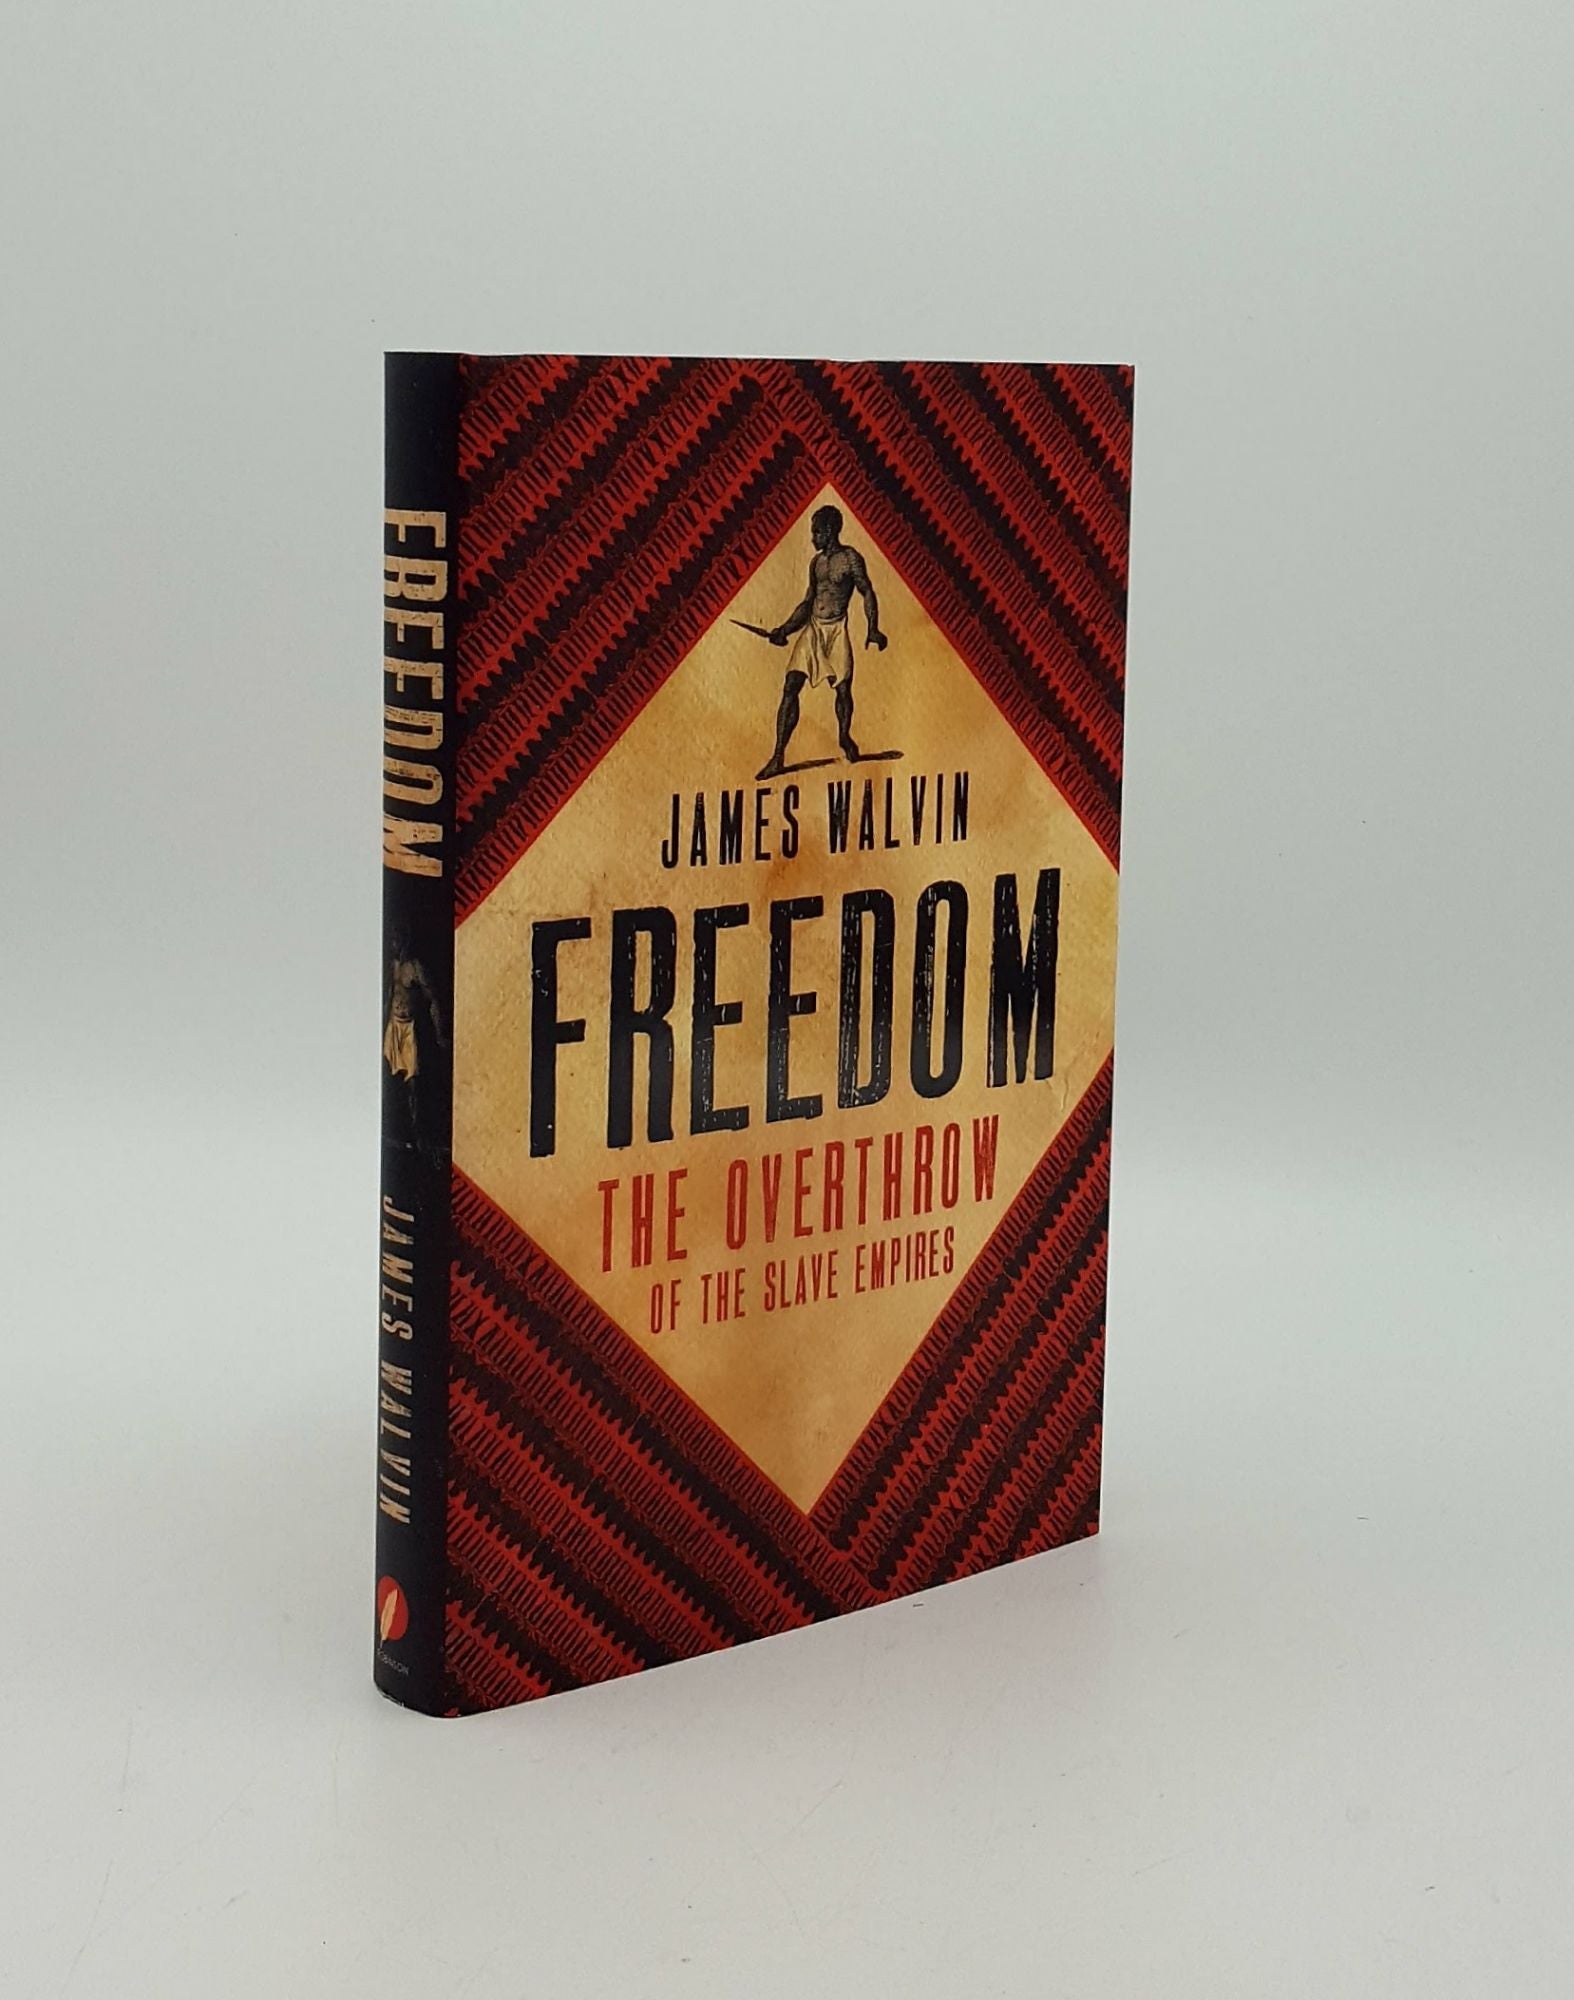 WALVIN James - Freedom the Overthrow of the Slave Empires